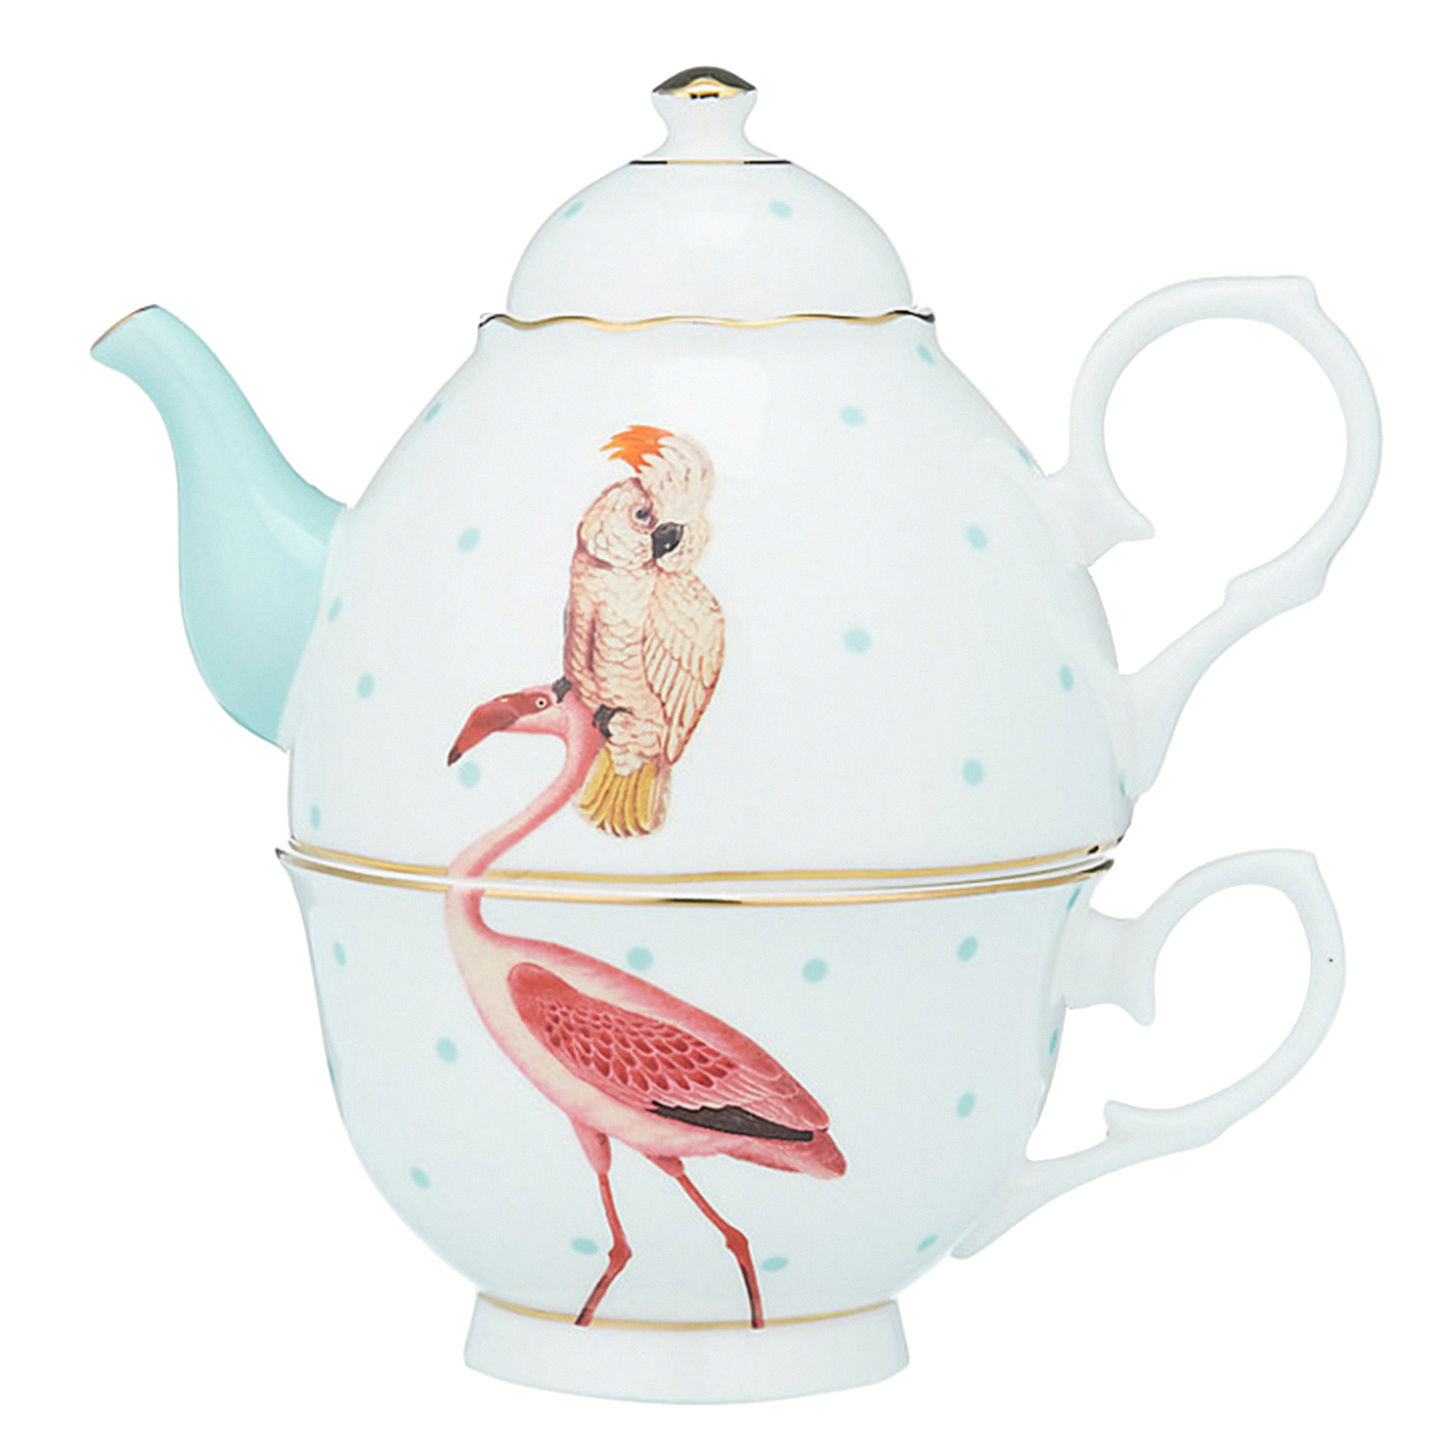 Yvonne Ellen Tea for One - Teapot with cup - Flamingo and Parrot - Porcelain - Top quality